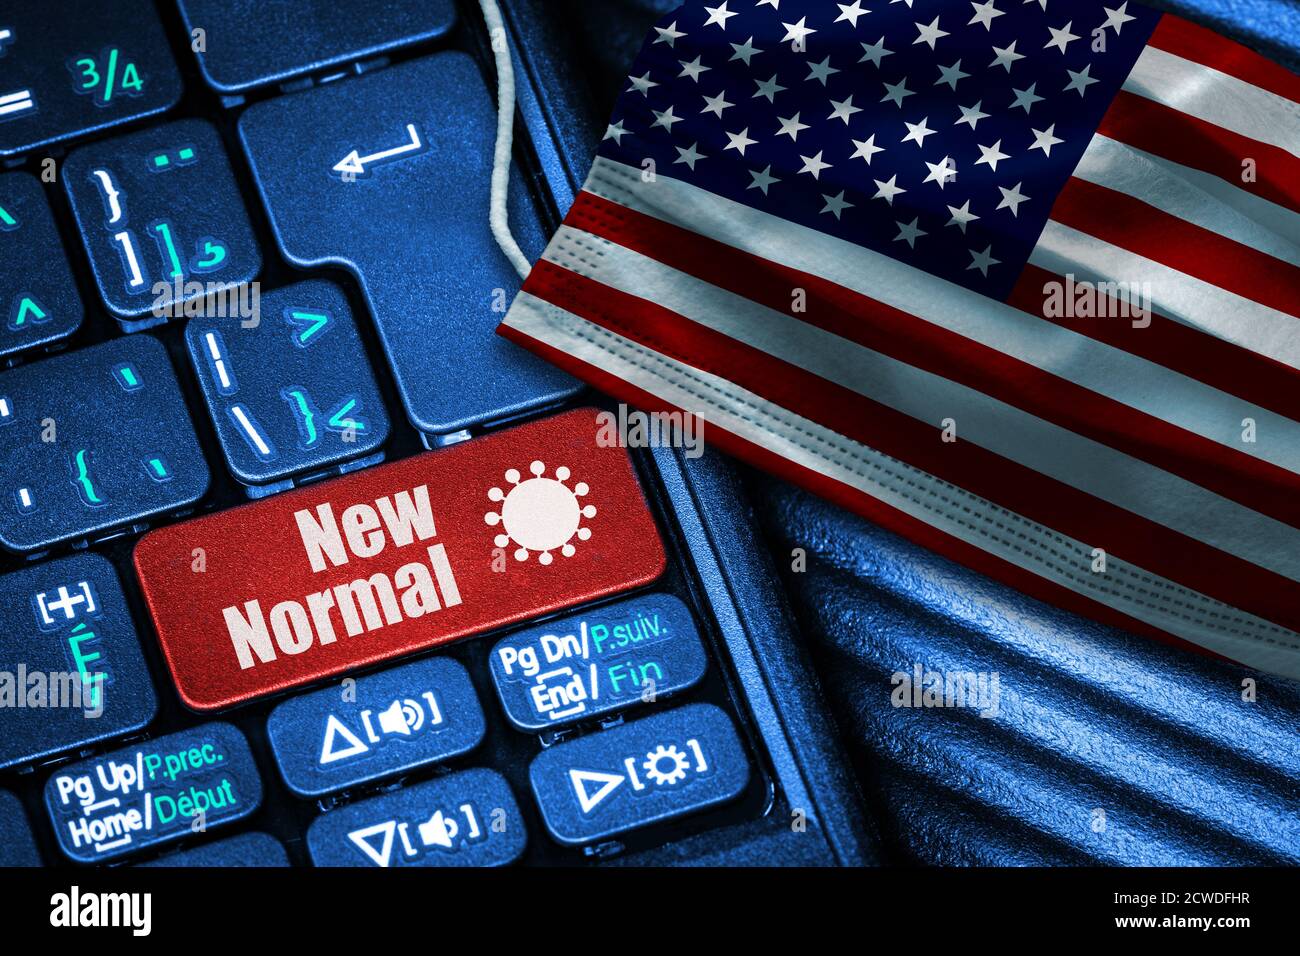 Concept of New Normal in the United States during Covid-19 with computer keyboard red button text and face mask showing US Flag. Stock Photo